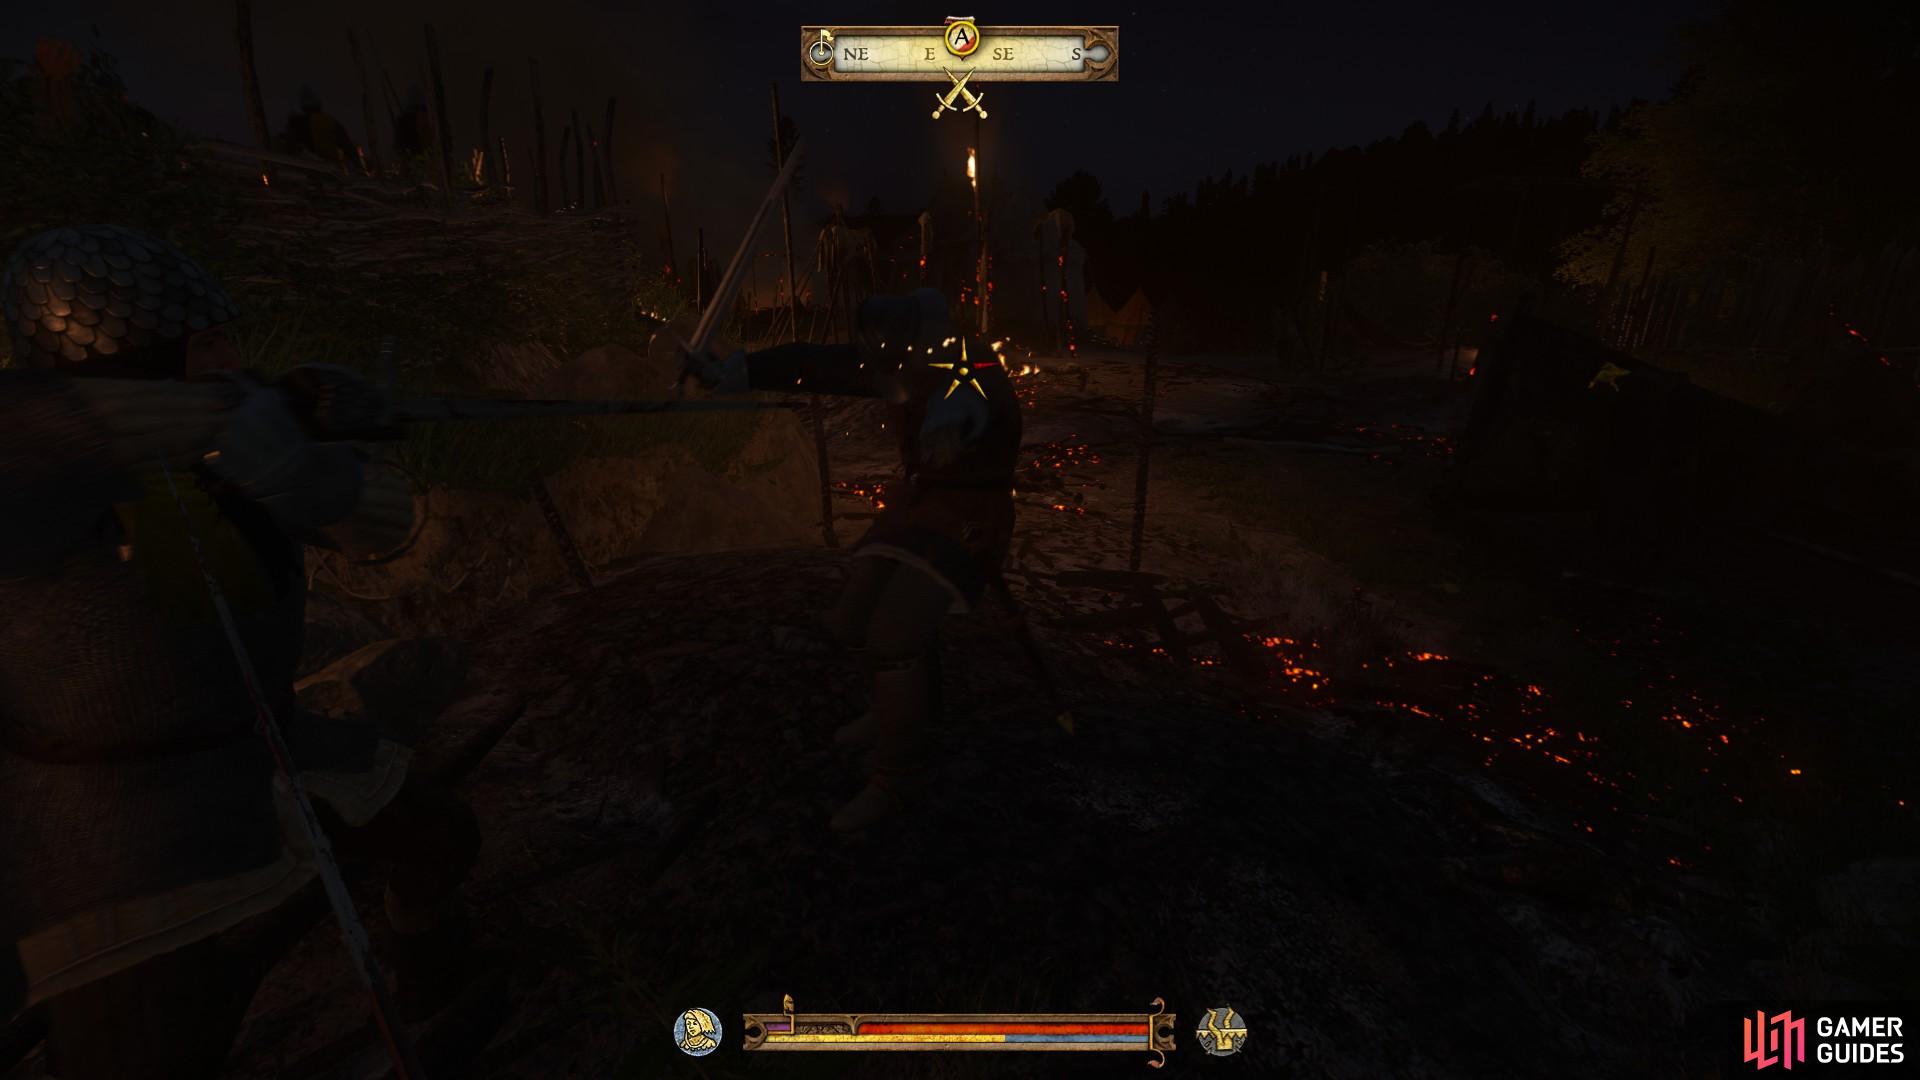 Fight the bandits that are waiting to ambush from the burning tents to the east until you have secured the location.